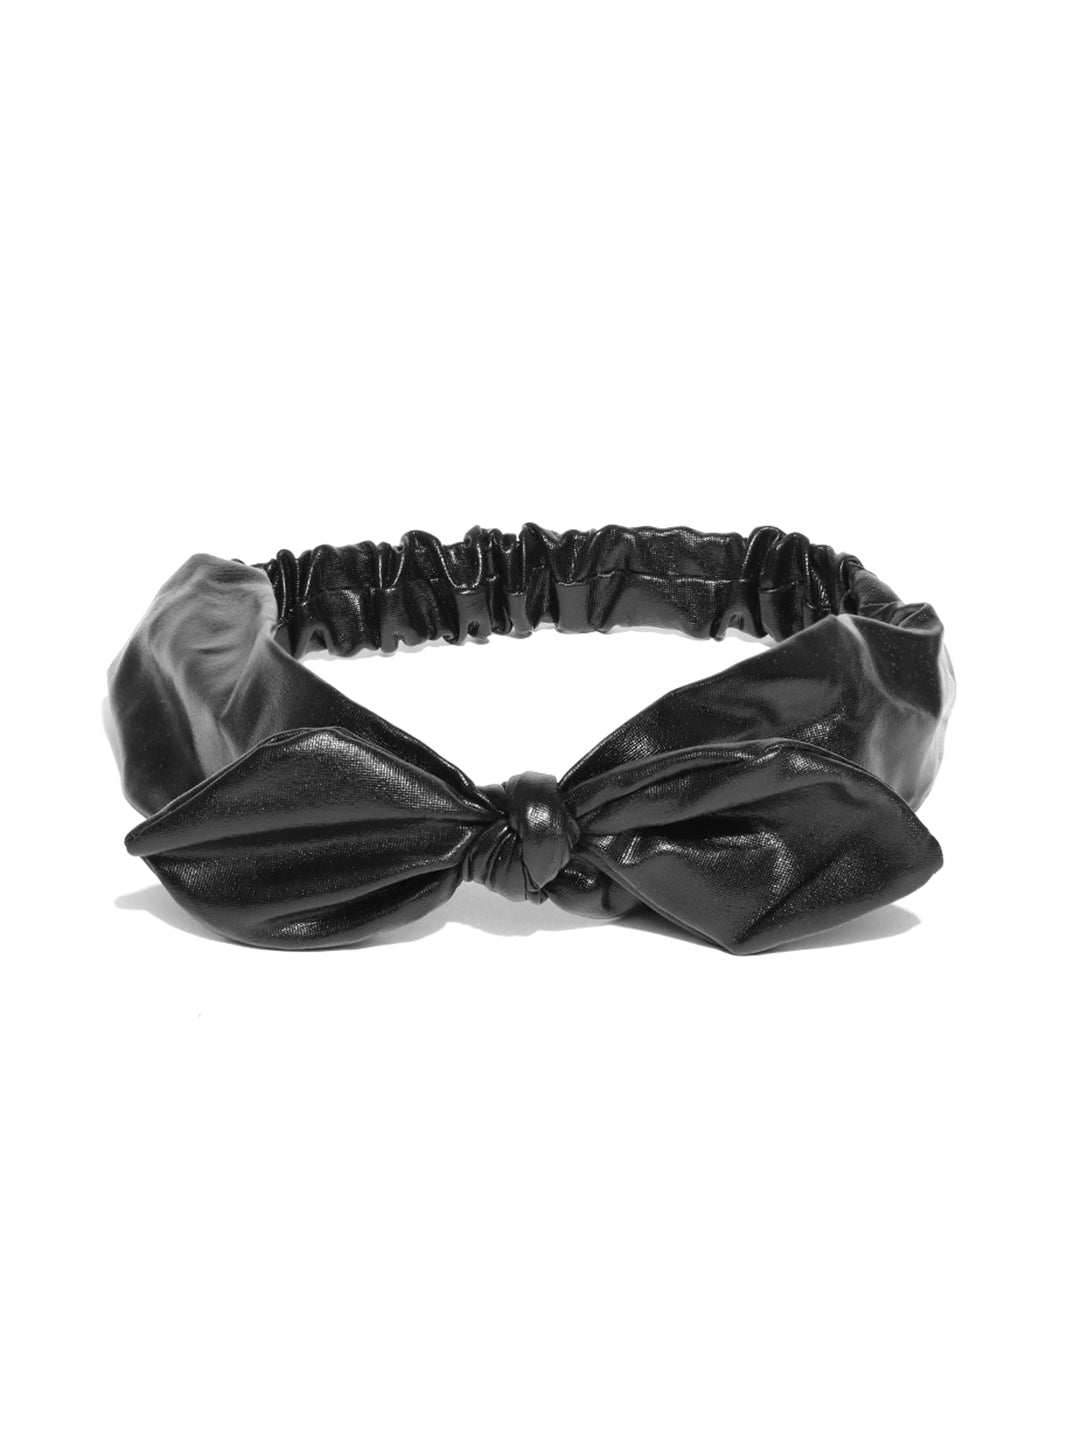 Blueberry solid black leather bunny knot hair band